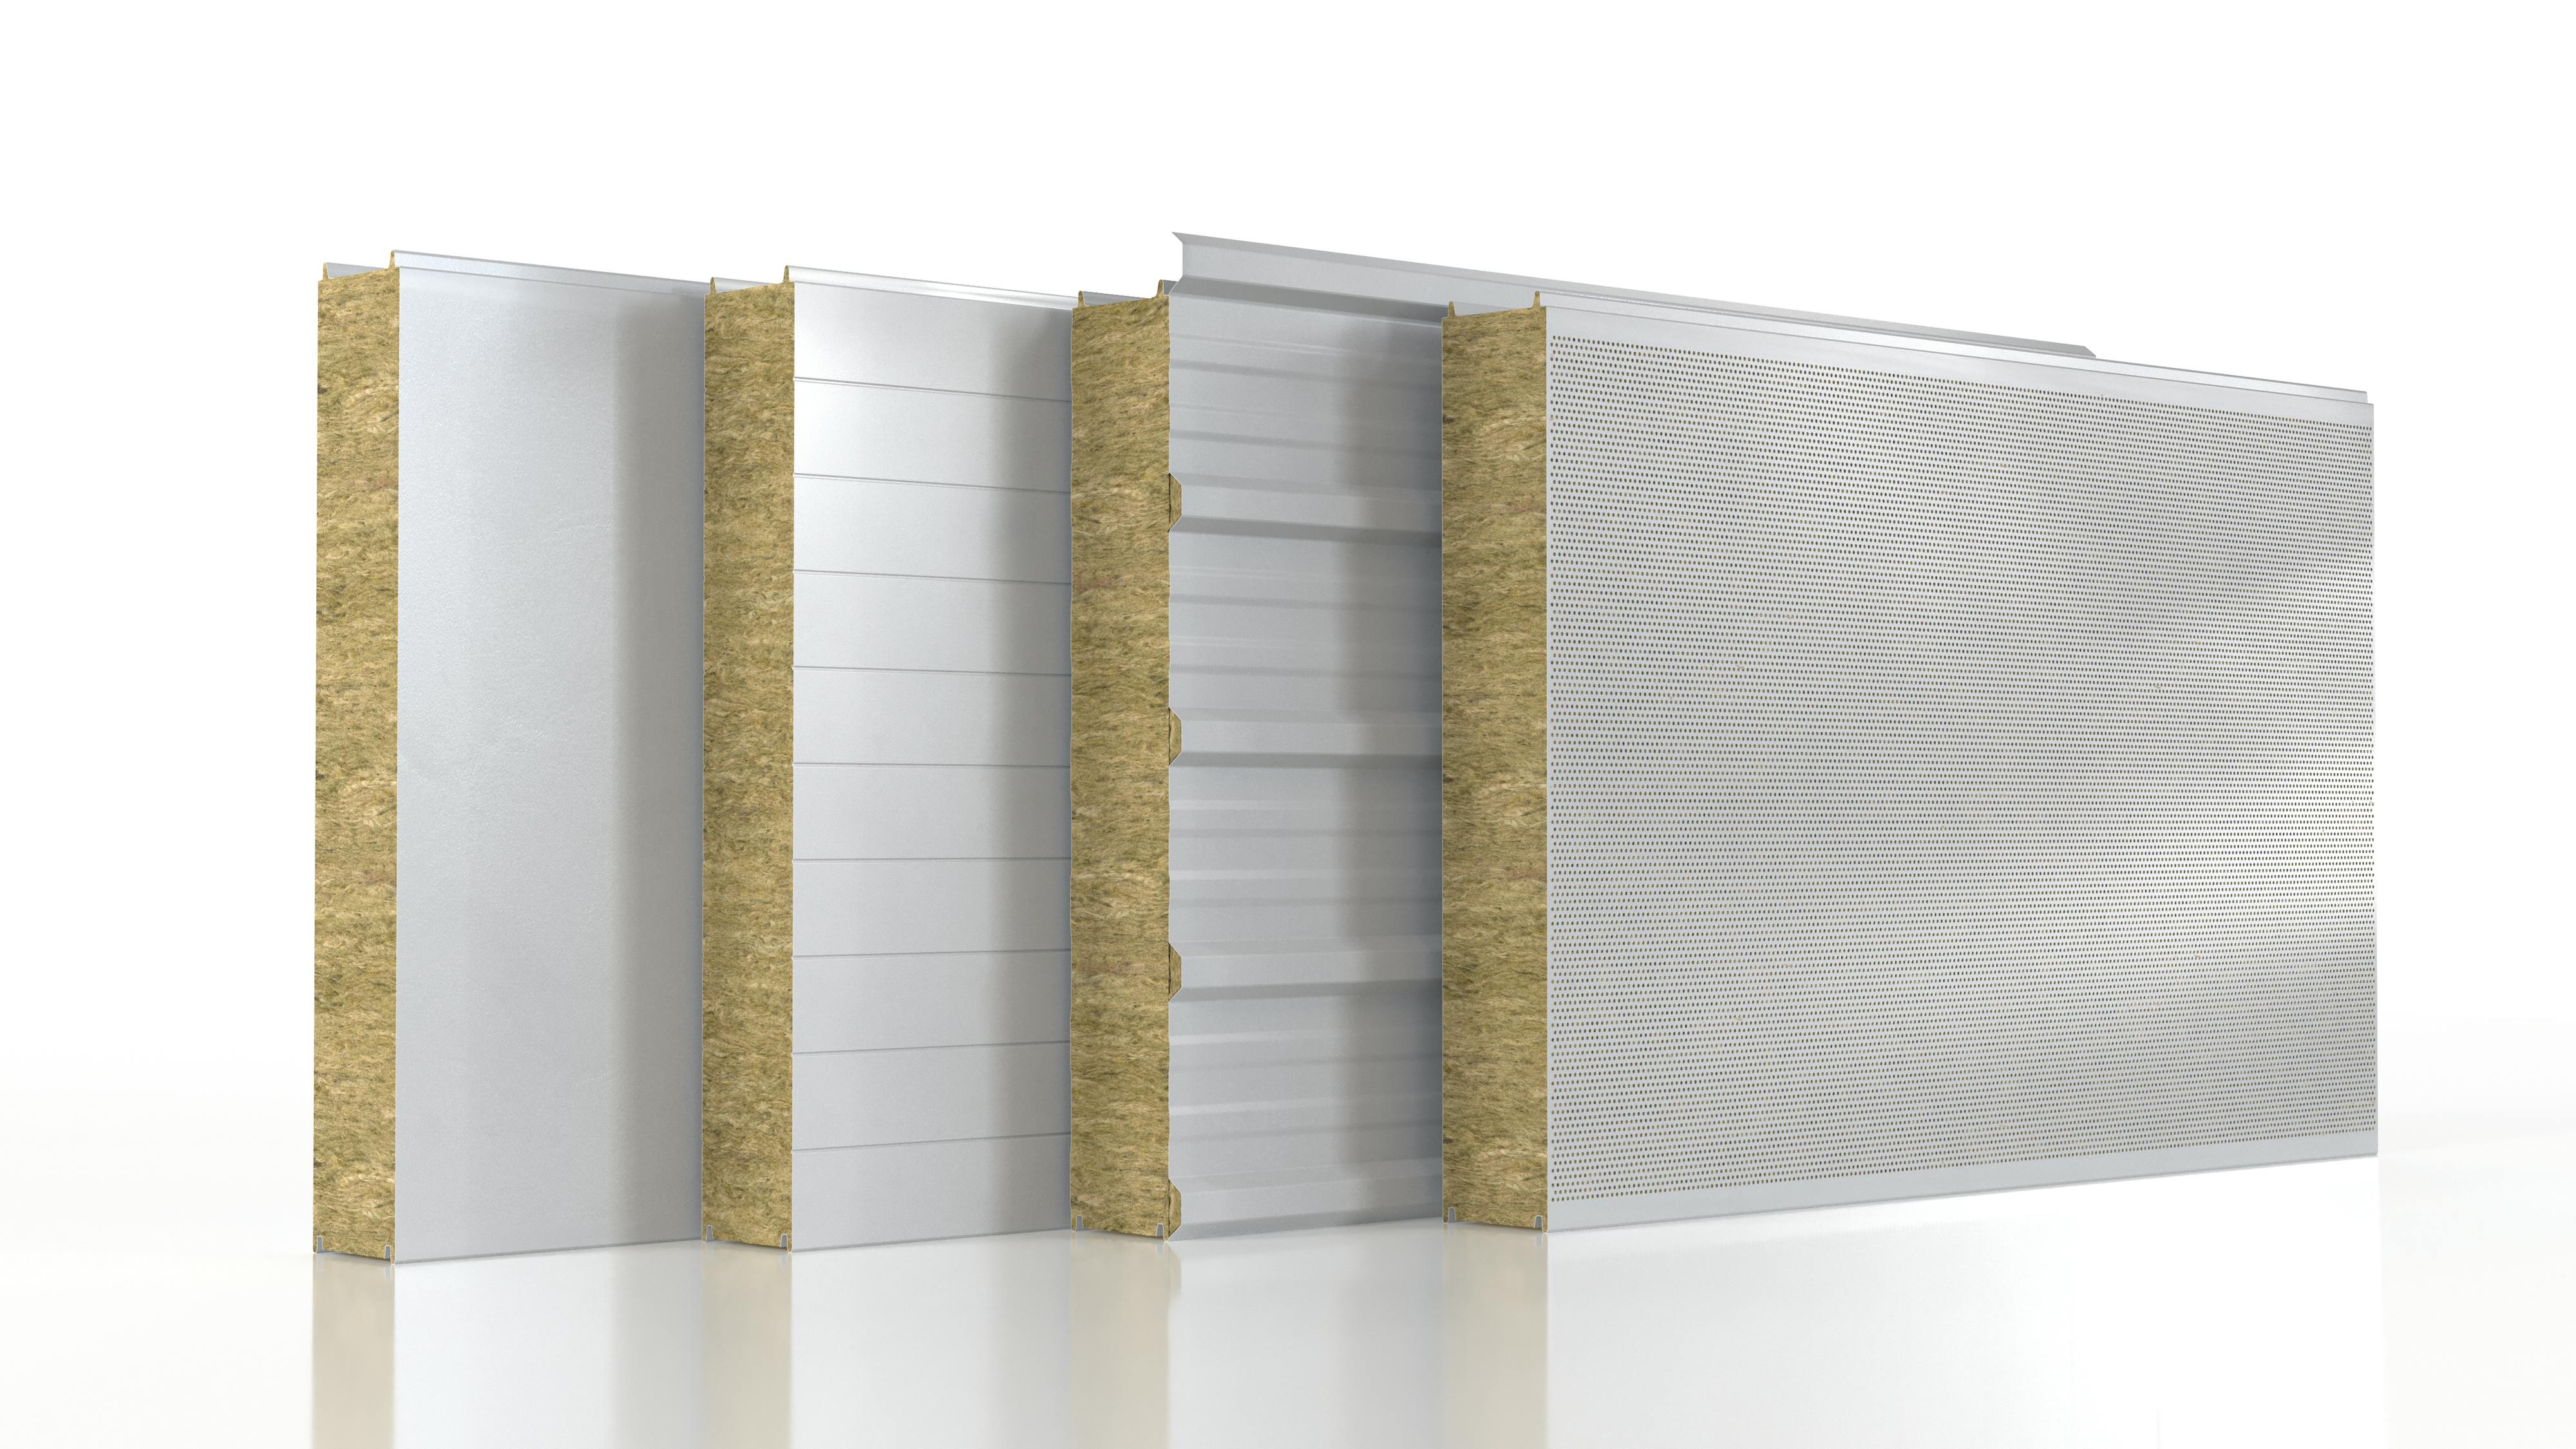 Graphic rendering of stone wool sandwich panels